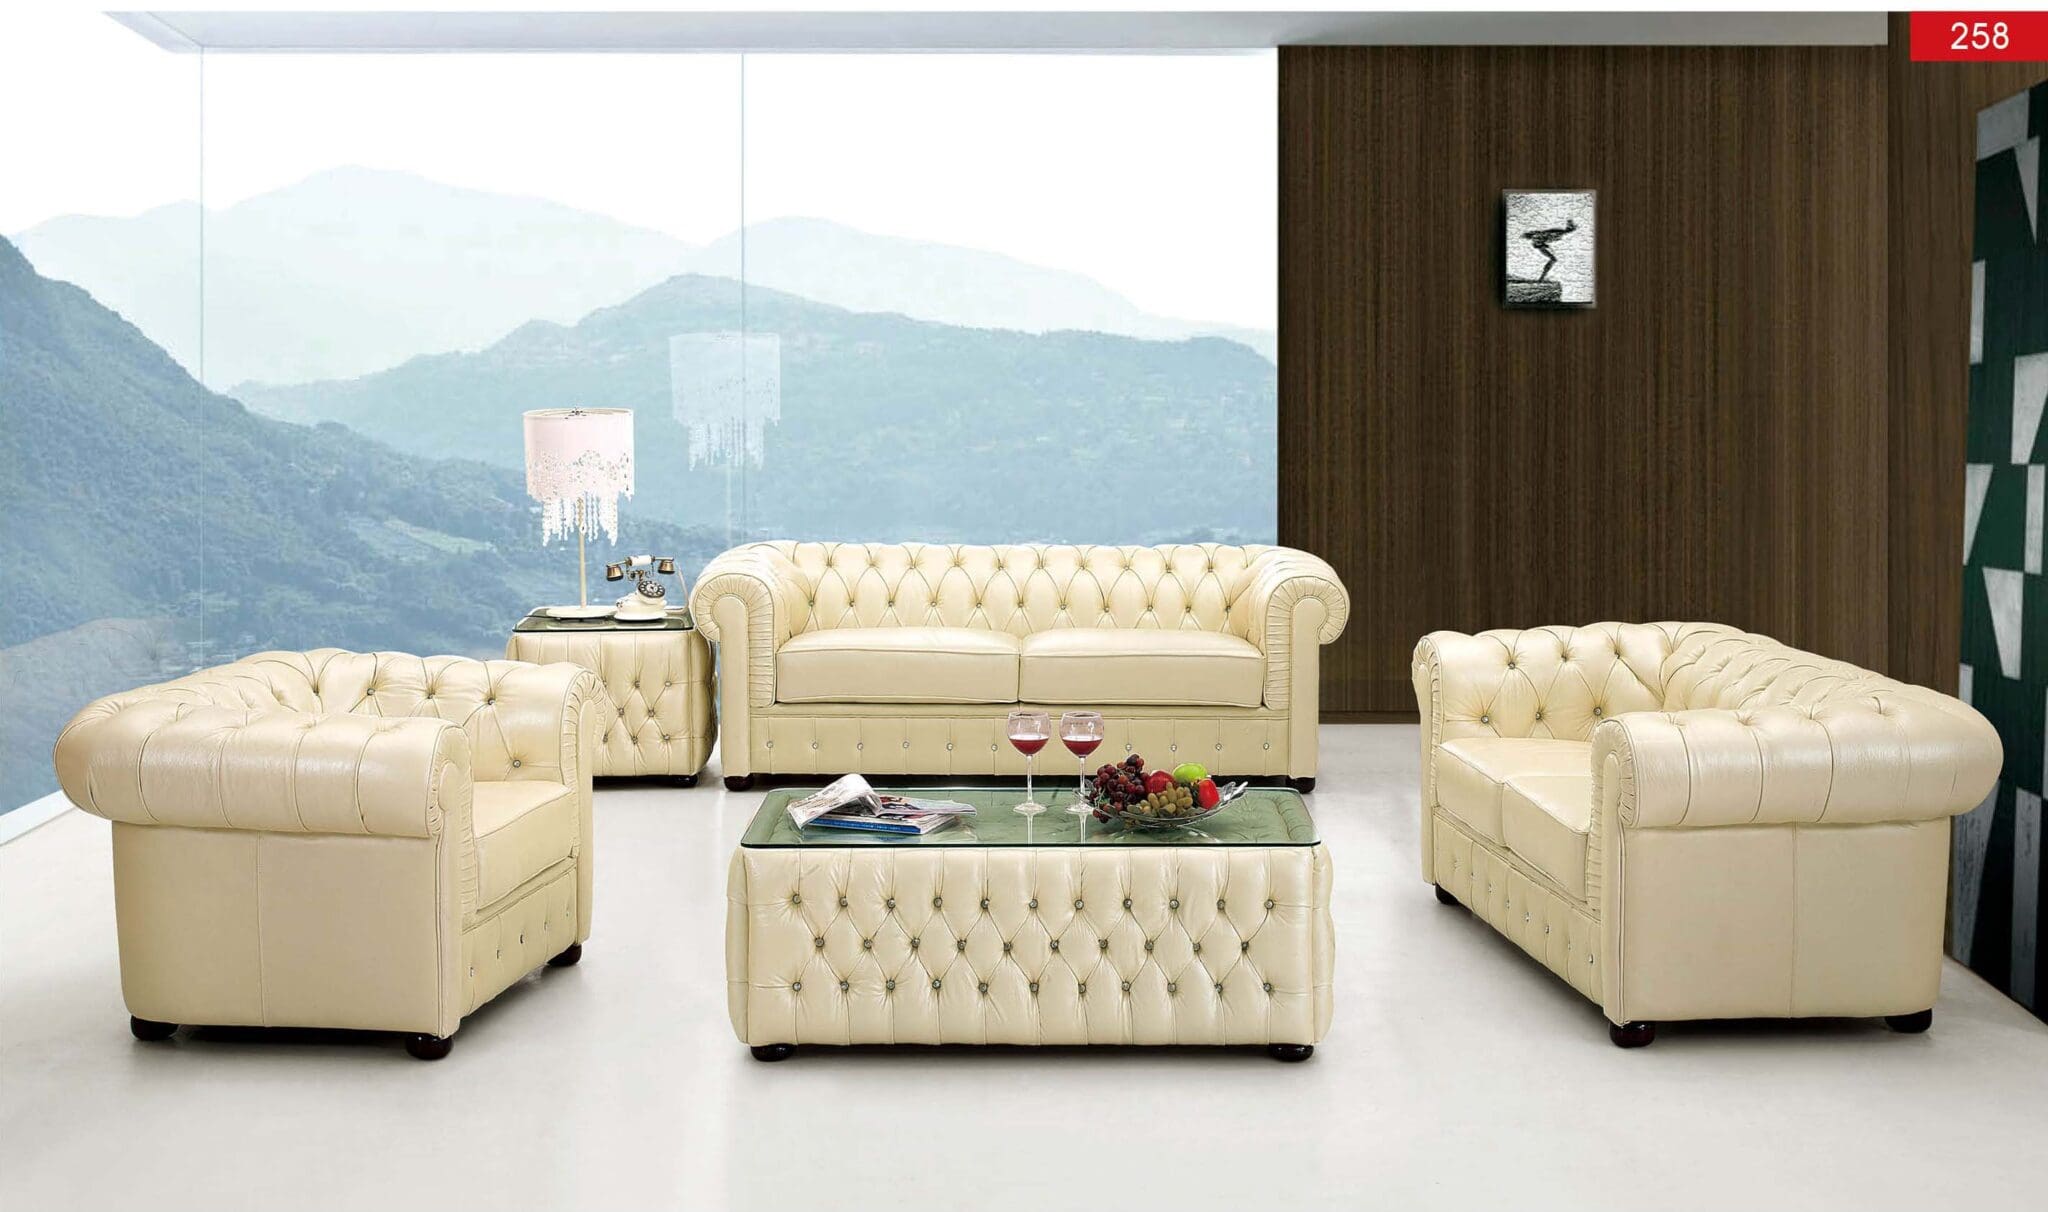 405 Leather Living Room Set By Esf Furniture